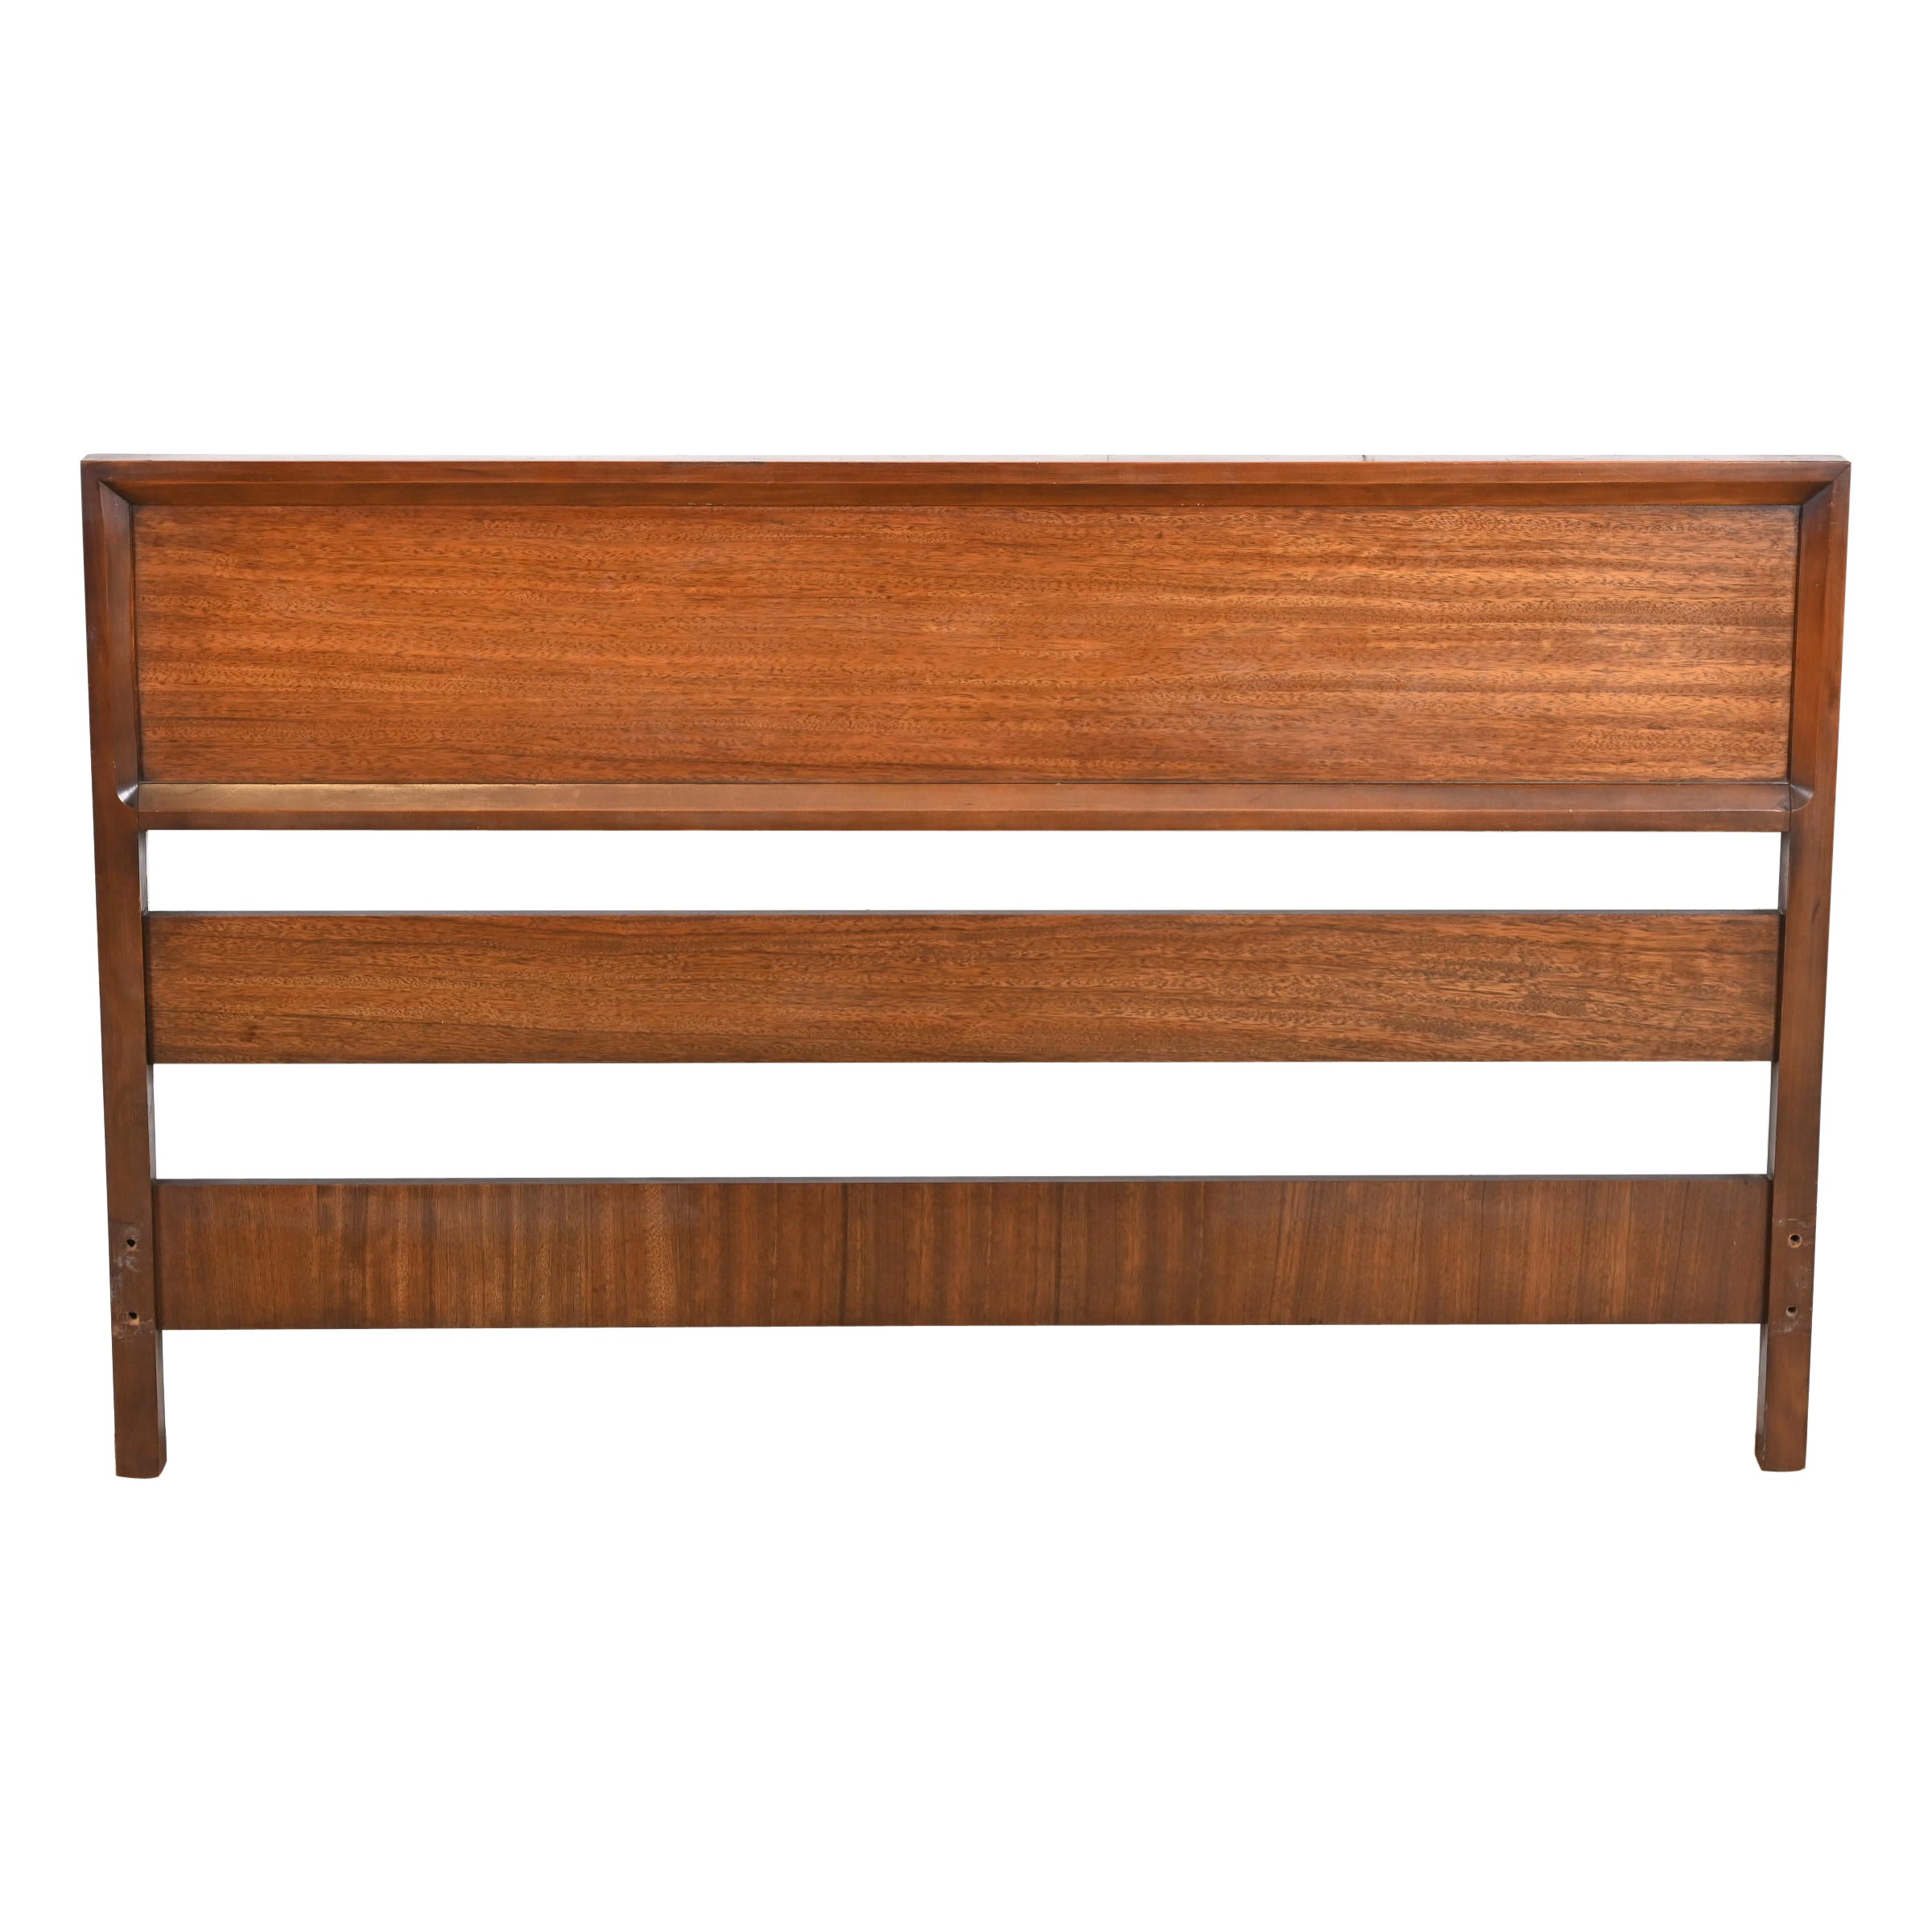 Milo Baughman for Drexel Perspective Exotic Mindoro Wood Full Size Headboard For Sale